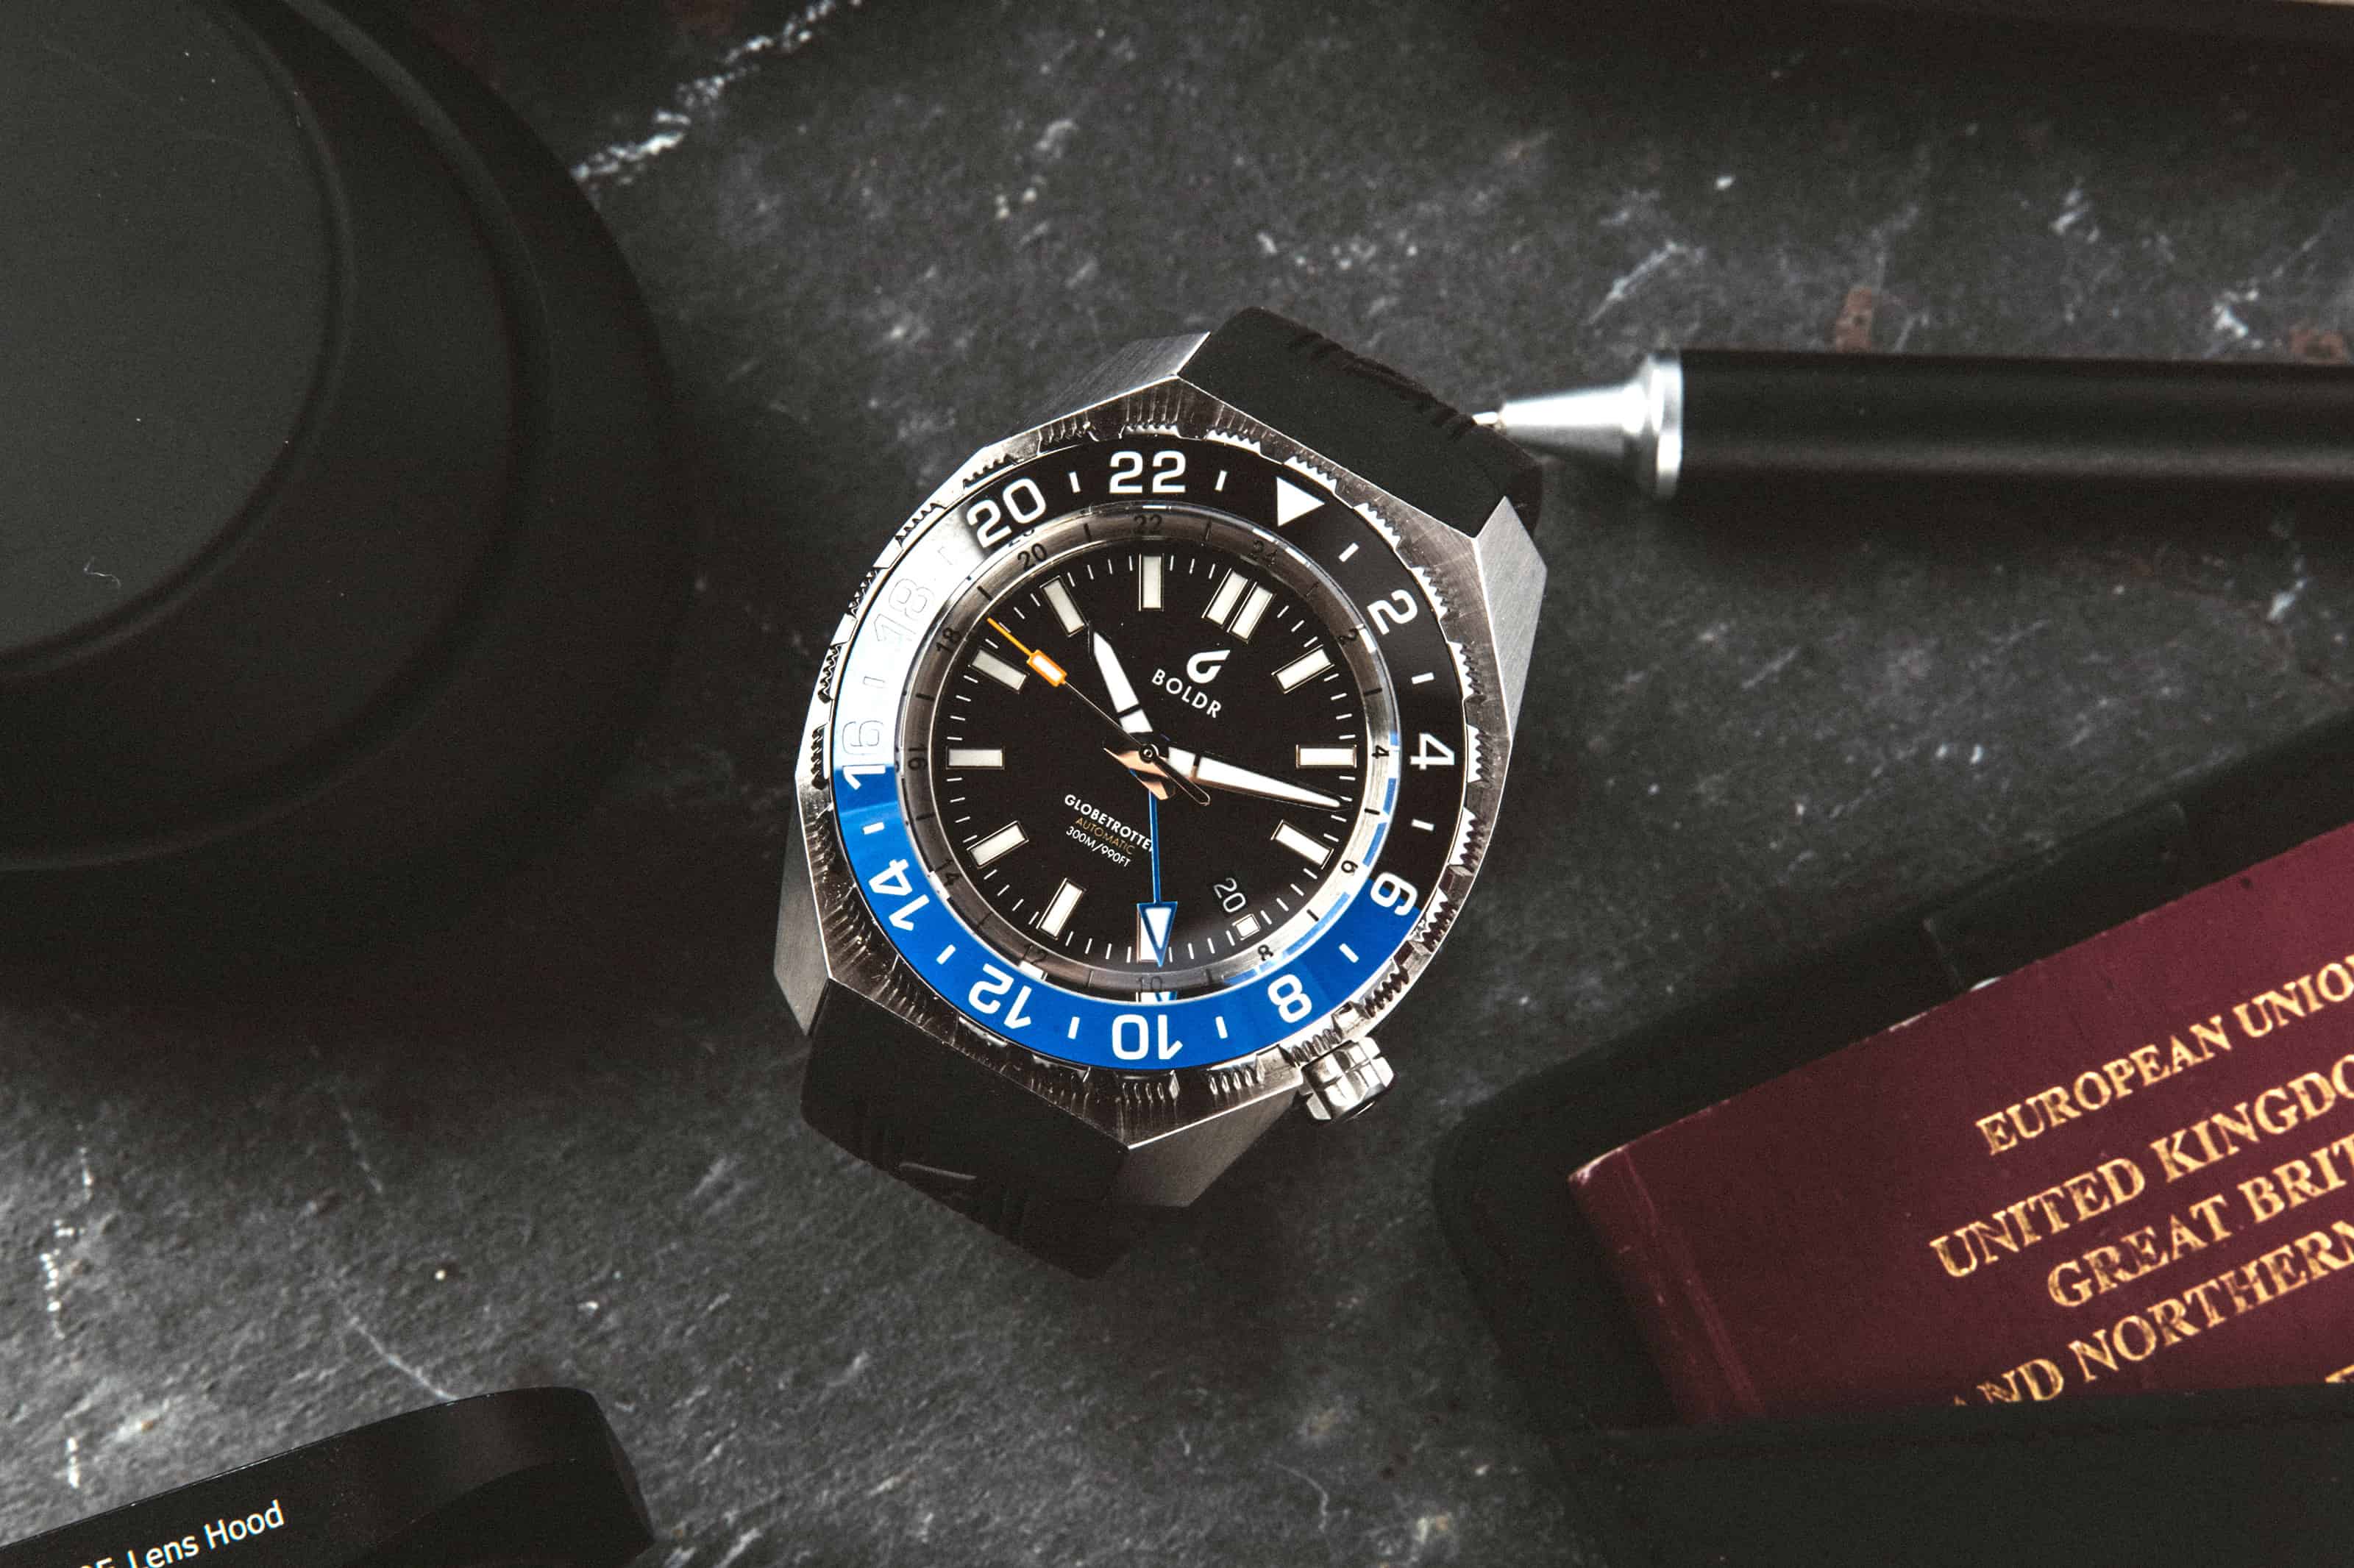 Introducing: BOLDR Globetrotter Automatic GMT